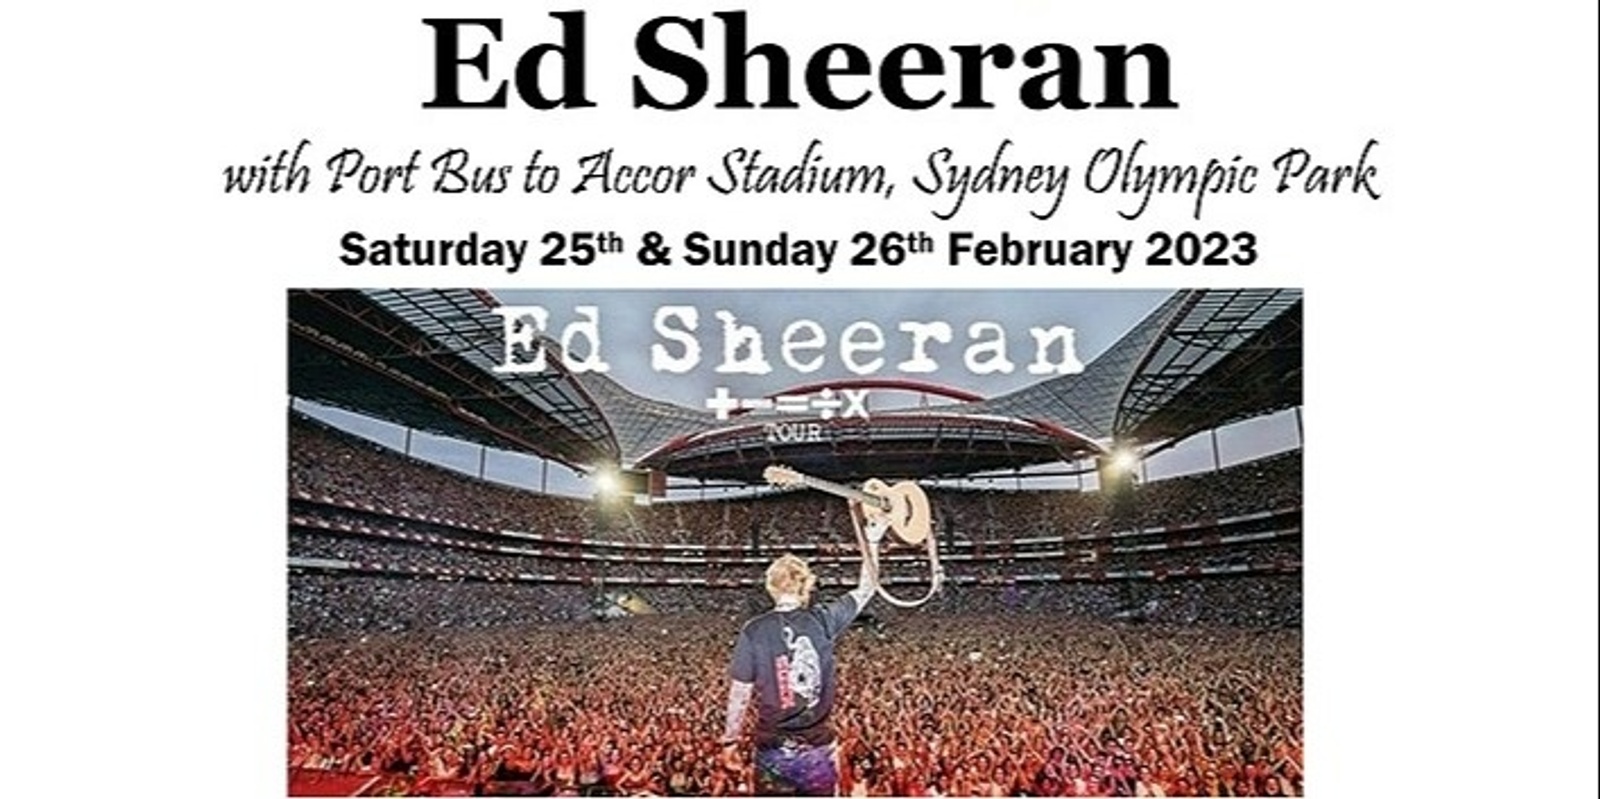 Banner image for Ed Sheeran 2 with Port Bus